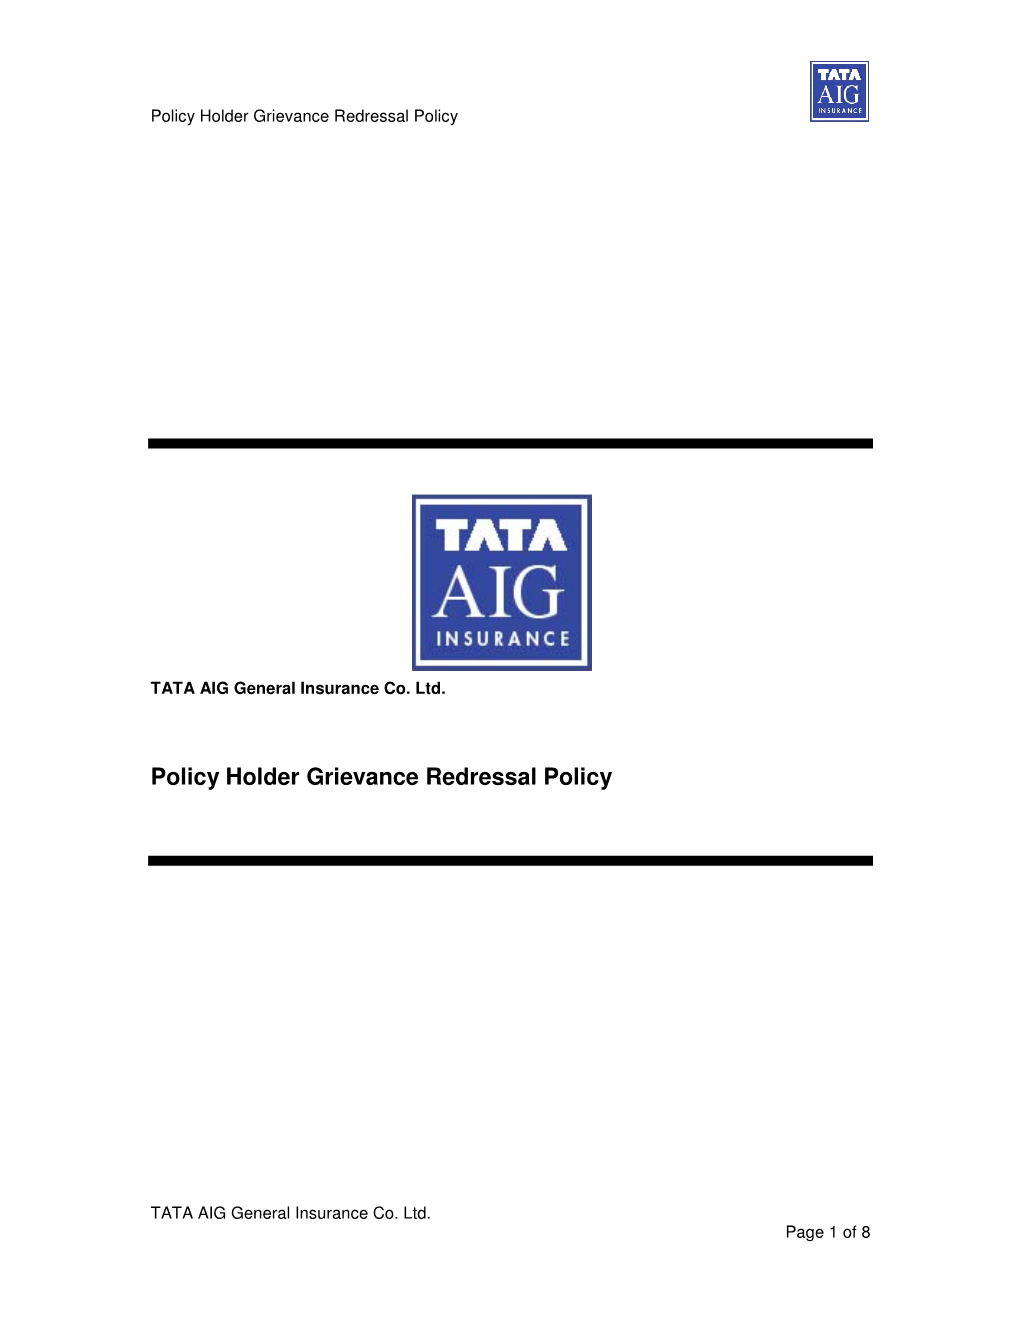 Policy Holder Grievance Redressal Policy